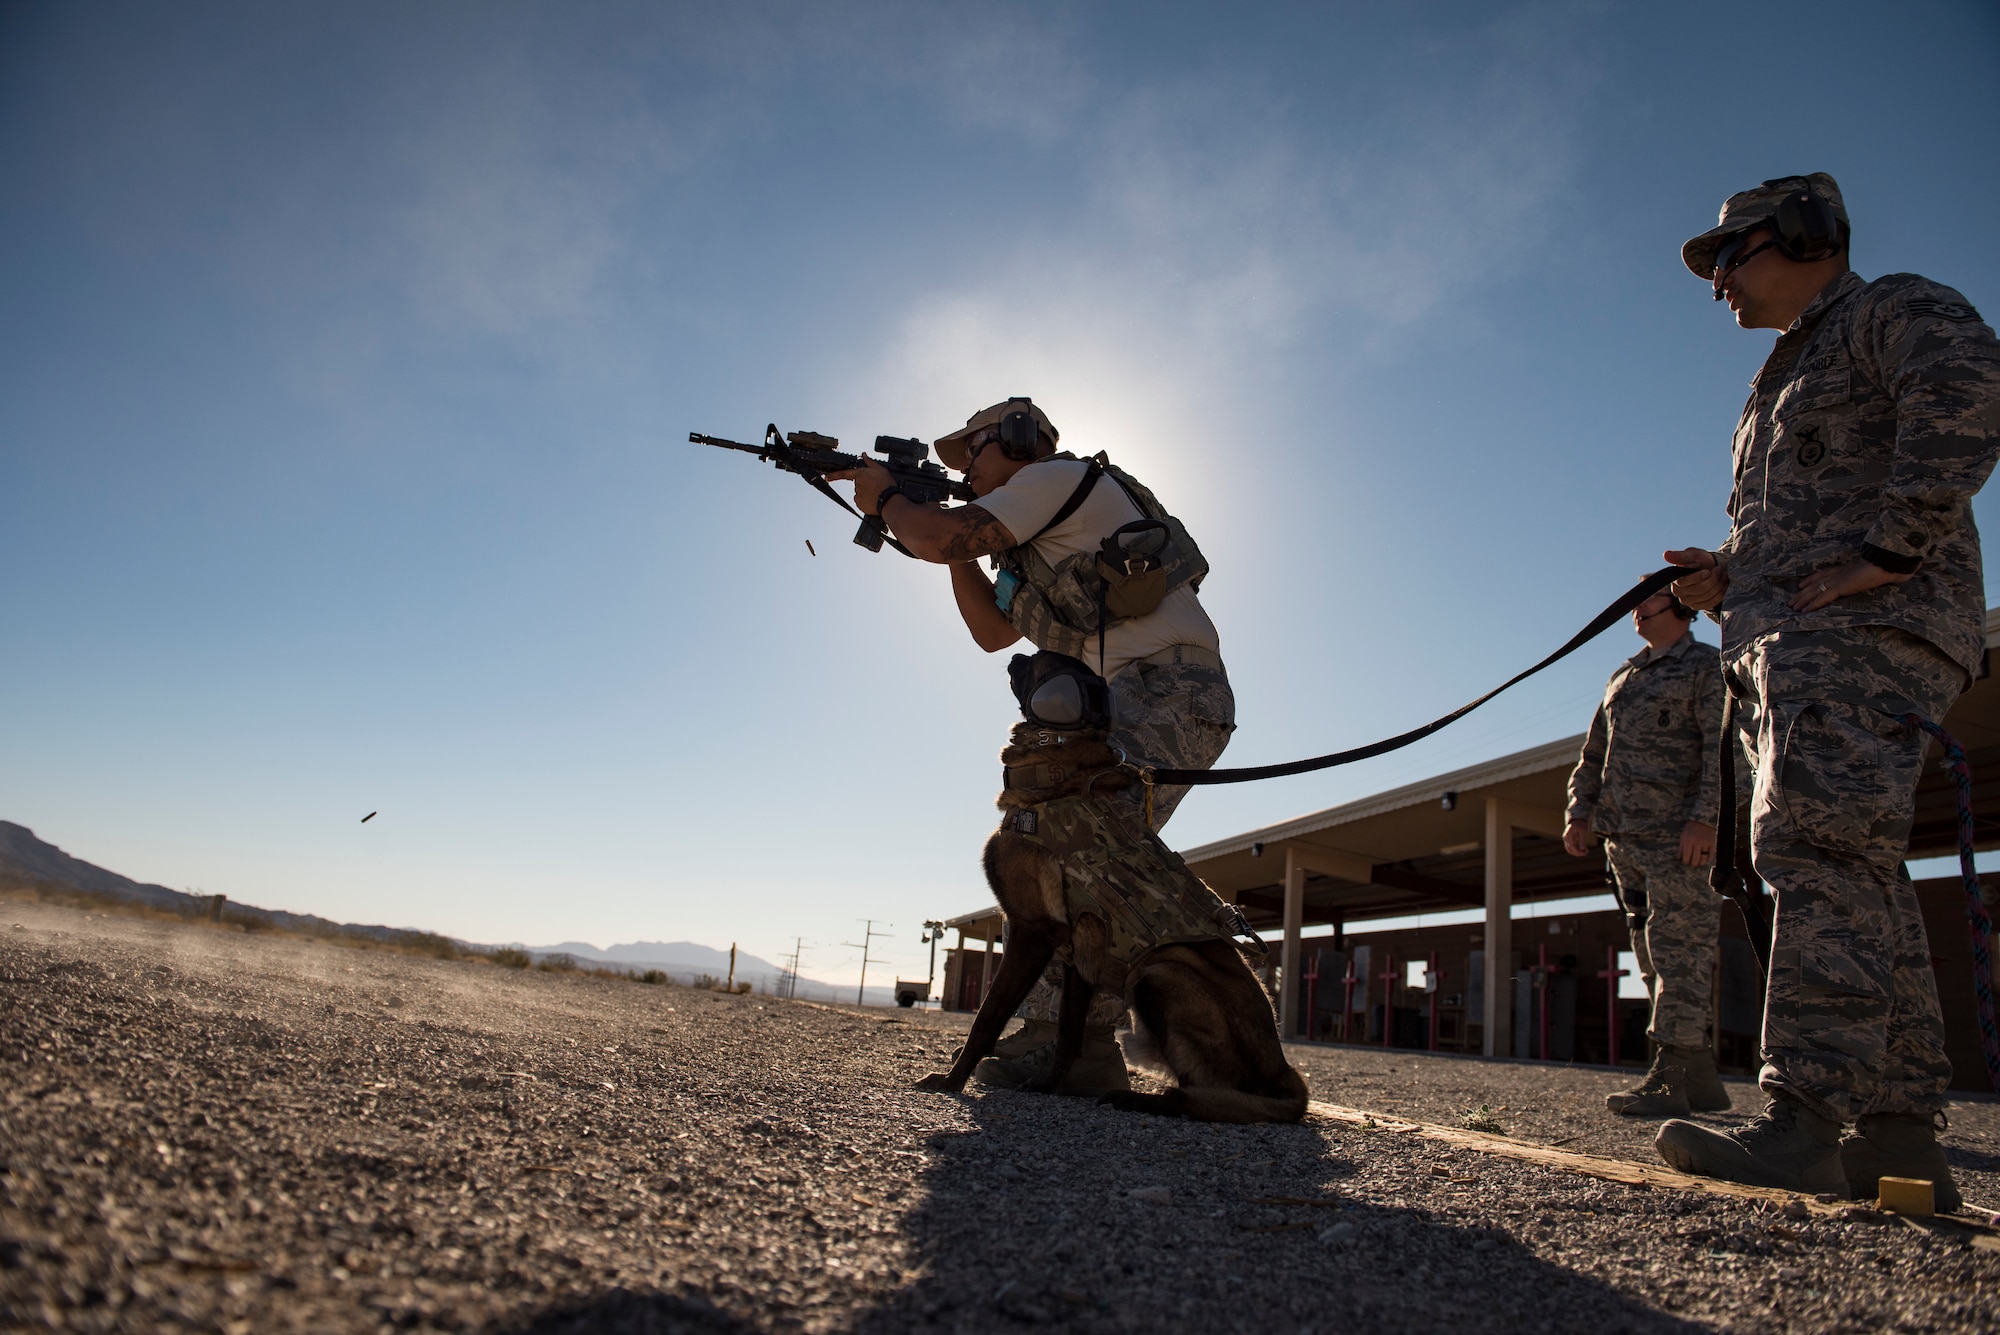 Staff. Sgt. Juan Hinojosa, 99th Security Forces Squadron military working dog handler, fires a rifle at Nellis Air Force Base, Nevada, Sept. 19, 2018. Each member maneuvered to different stations where they fired their rifle and pistol while maintaining control over their military working dogs. (U.S. Air Force photo by Airman 1st Class Andrew D. Sarver)